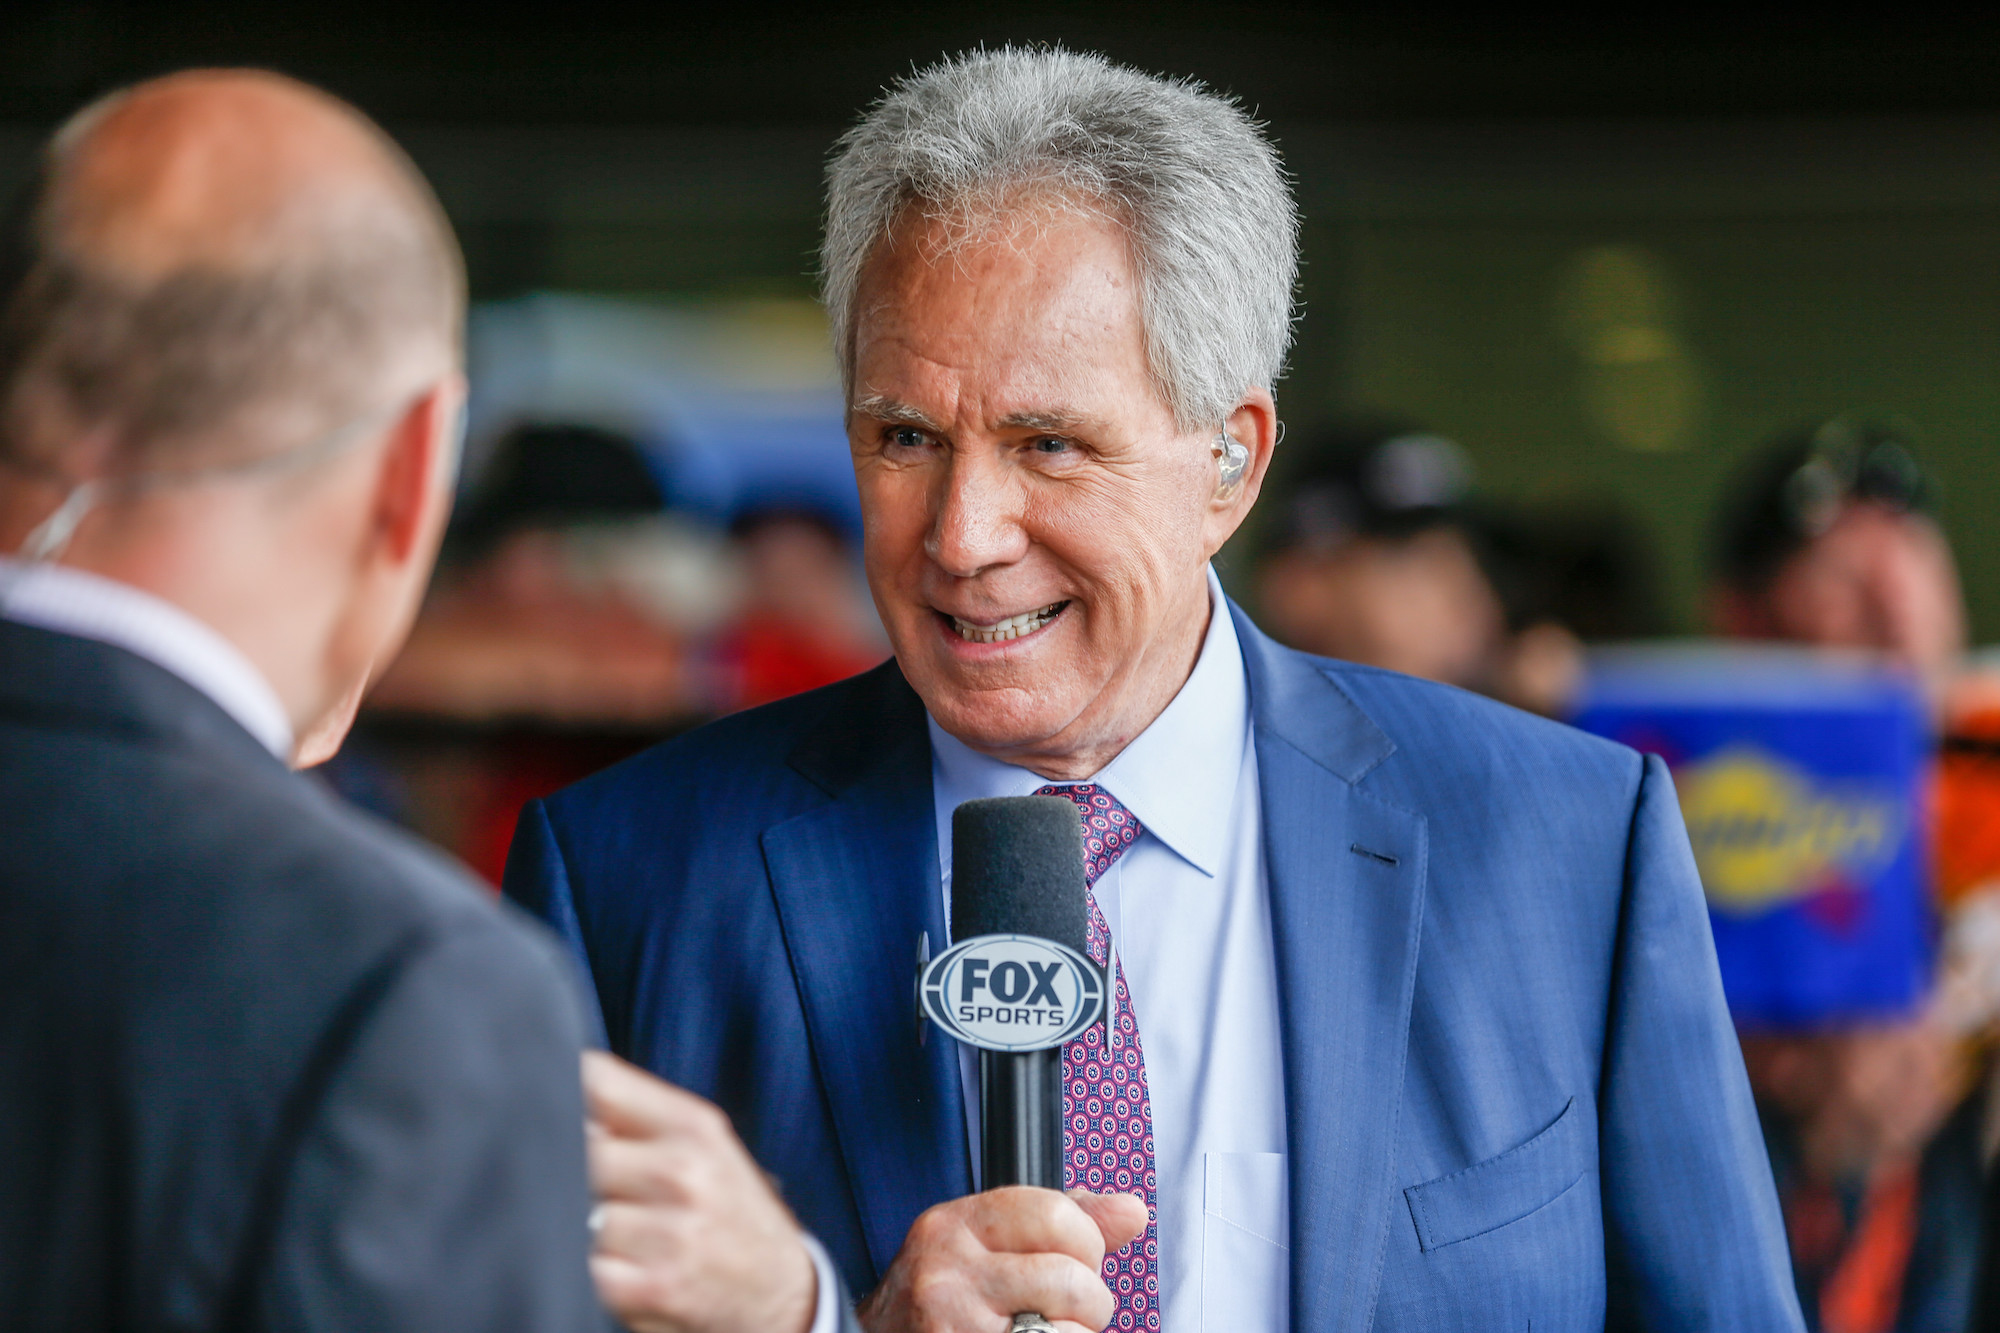 Darrell Waltrip Returns to Fox for Some ‘Boogity! Boogity!’ Racing at Bristol